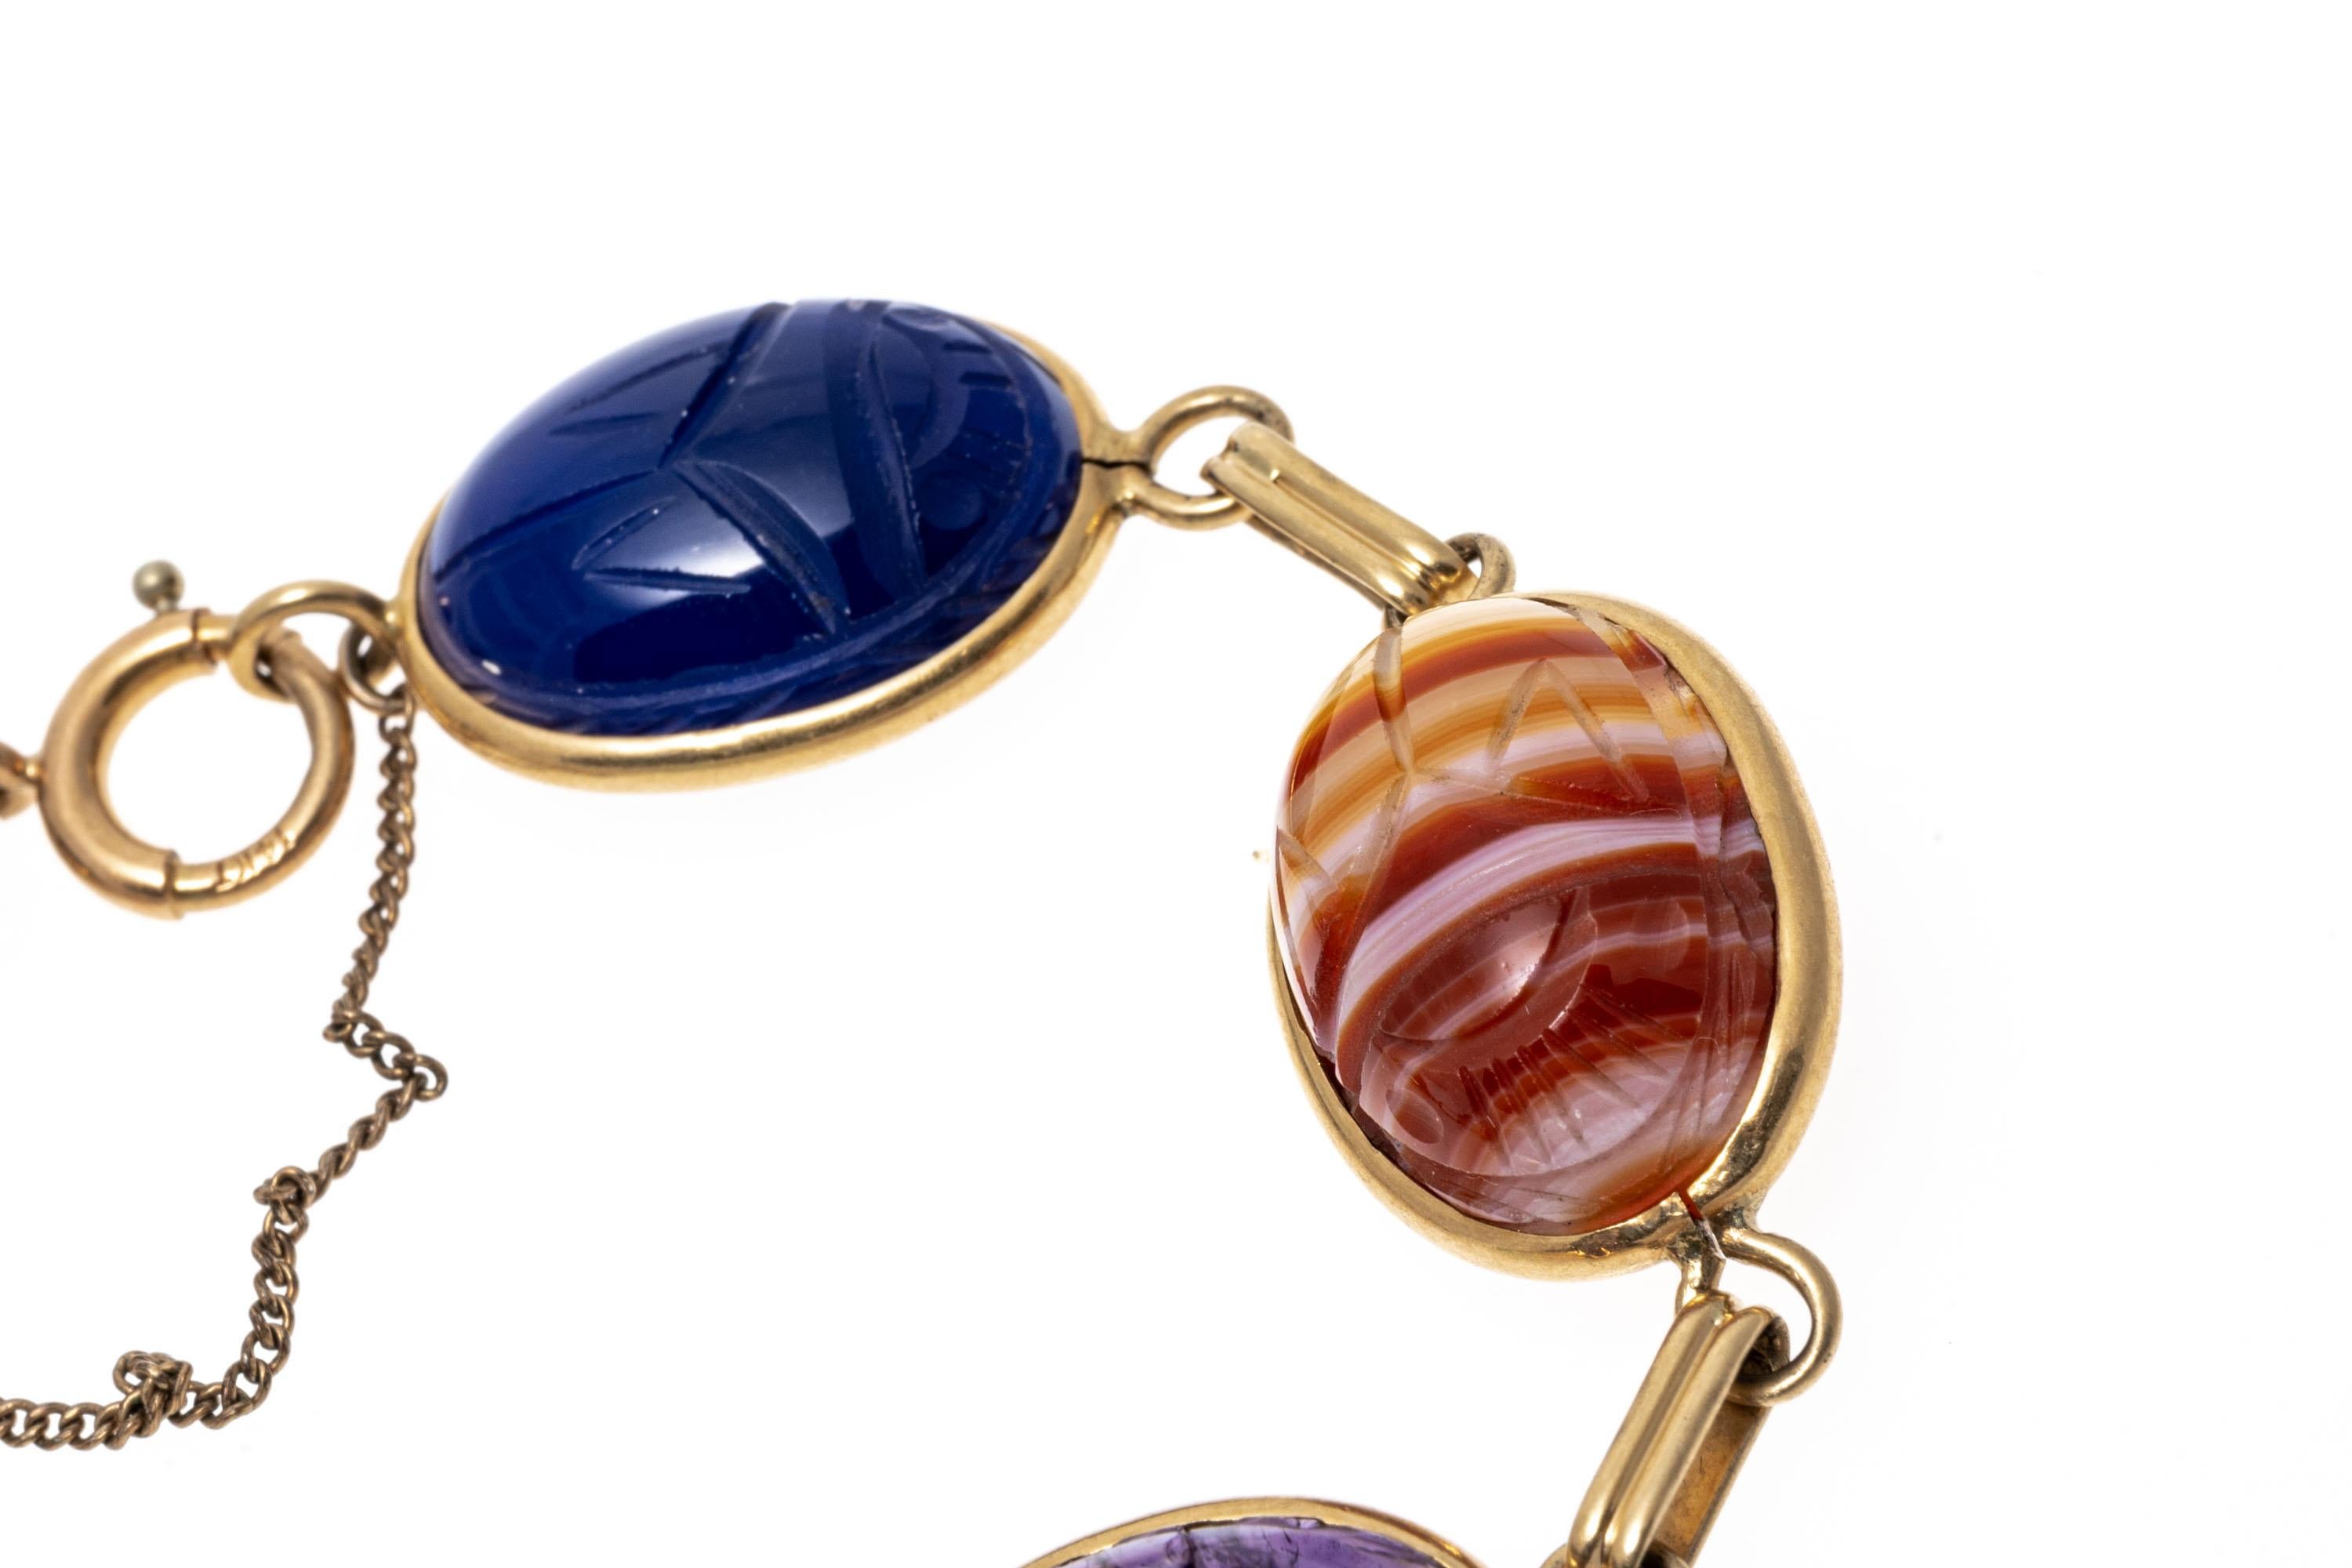 14k Yellow Gold Scarab Link Bracelet
This attractive bracelet is a scarab link style, set with carved tigers eye, rhodonite, green chalcedony, amethyst, agate and blue onyx stones, bezel set. The bracelet has a spring ring style clasp with a safety